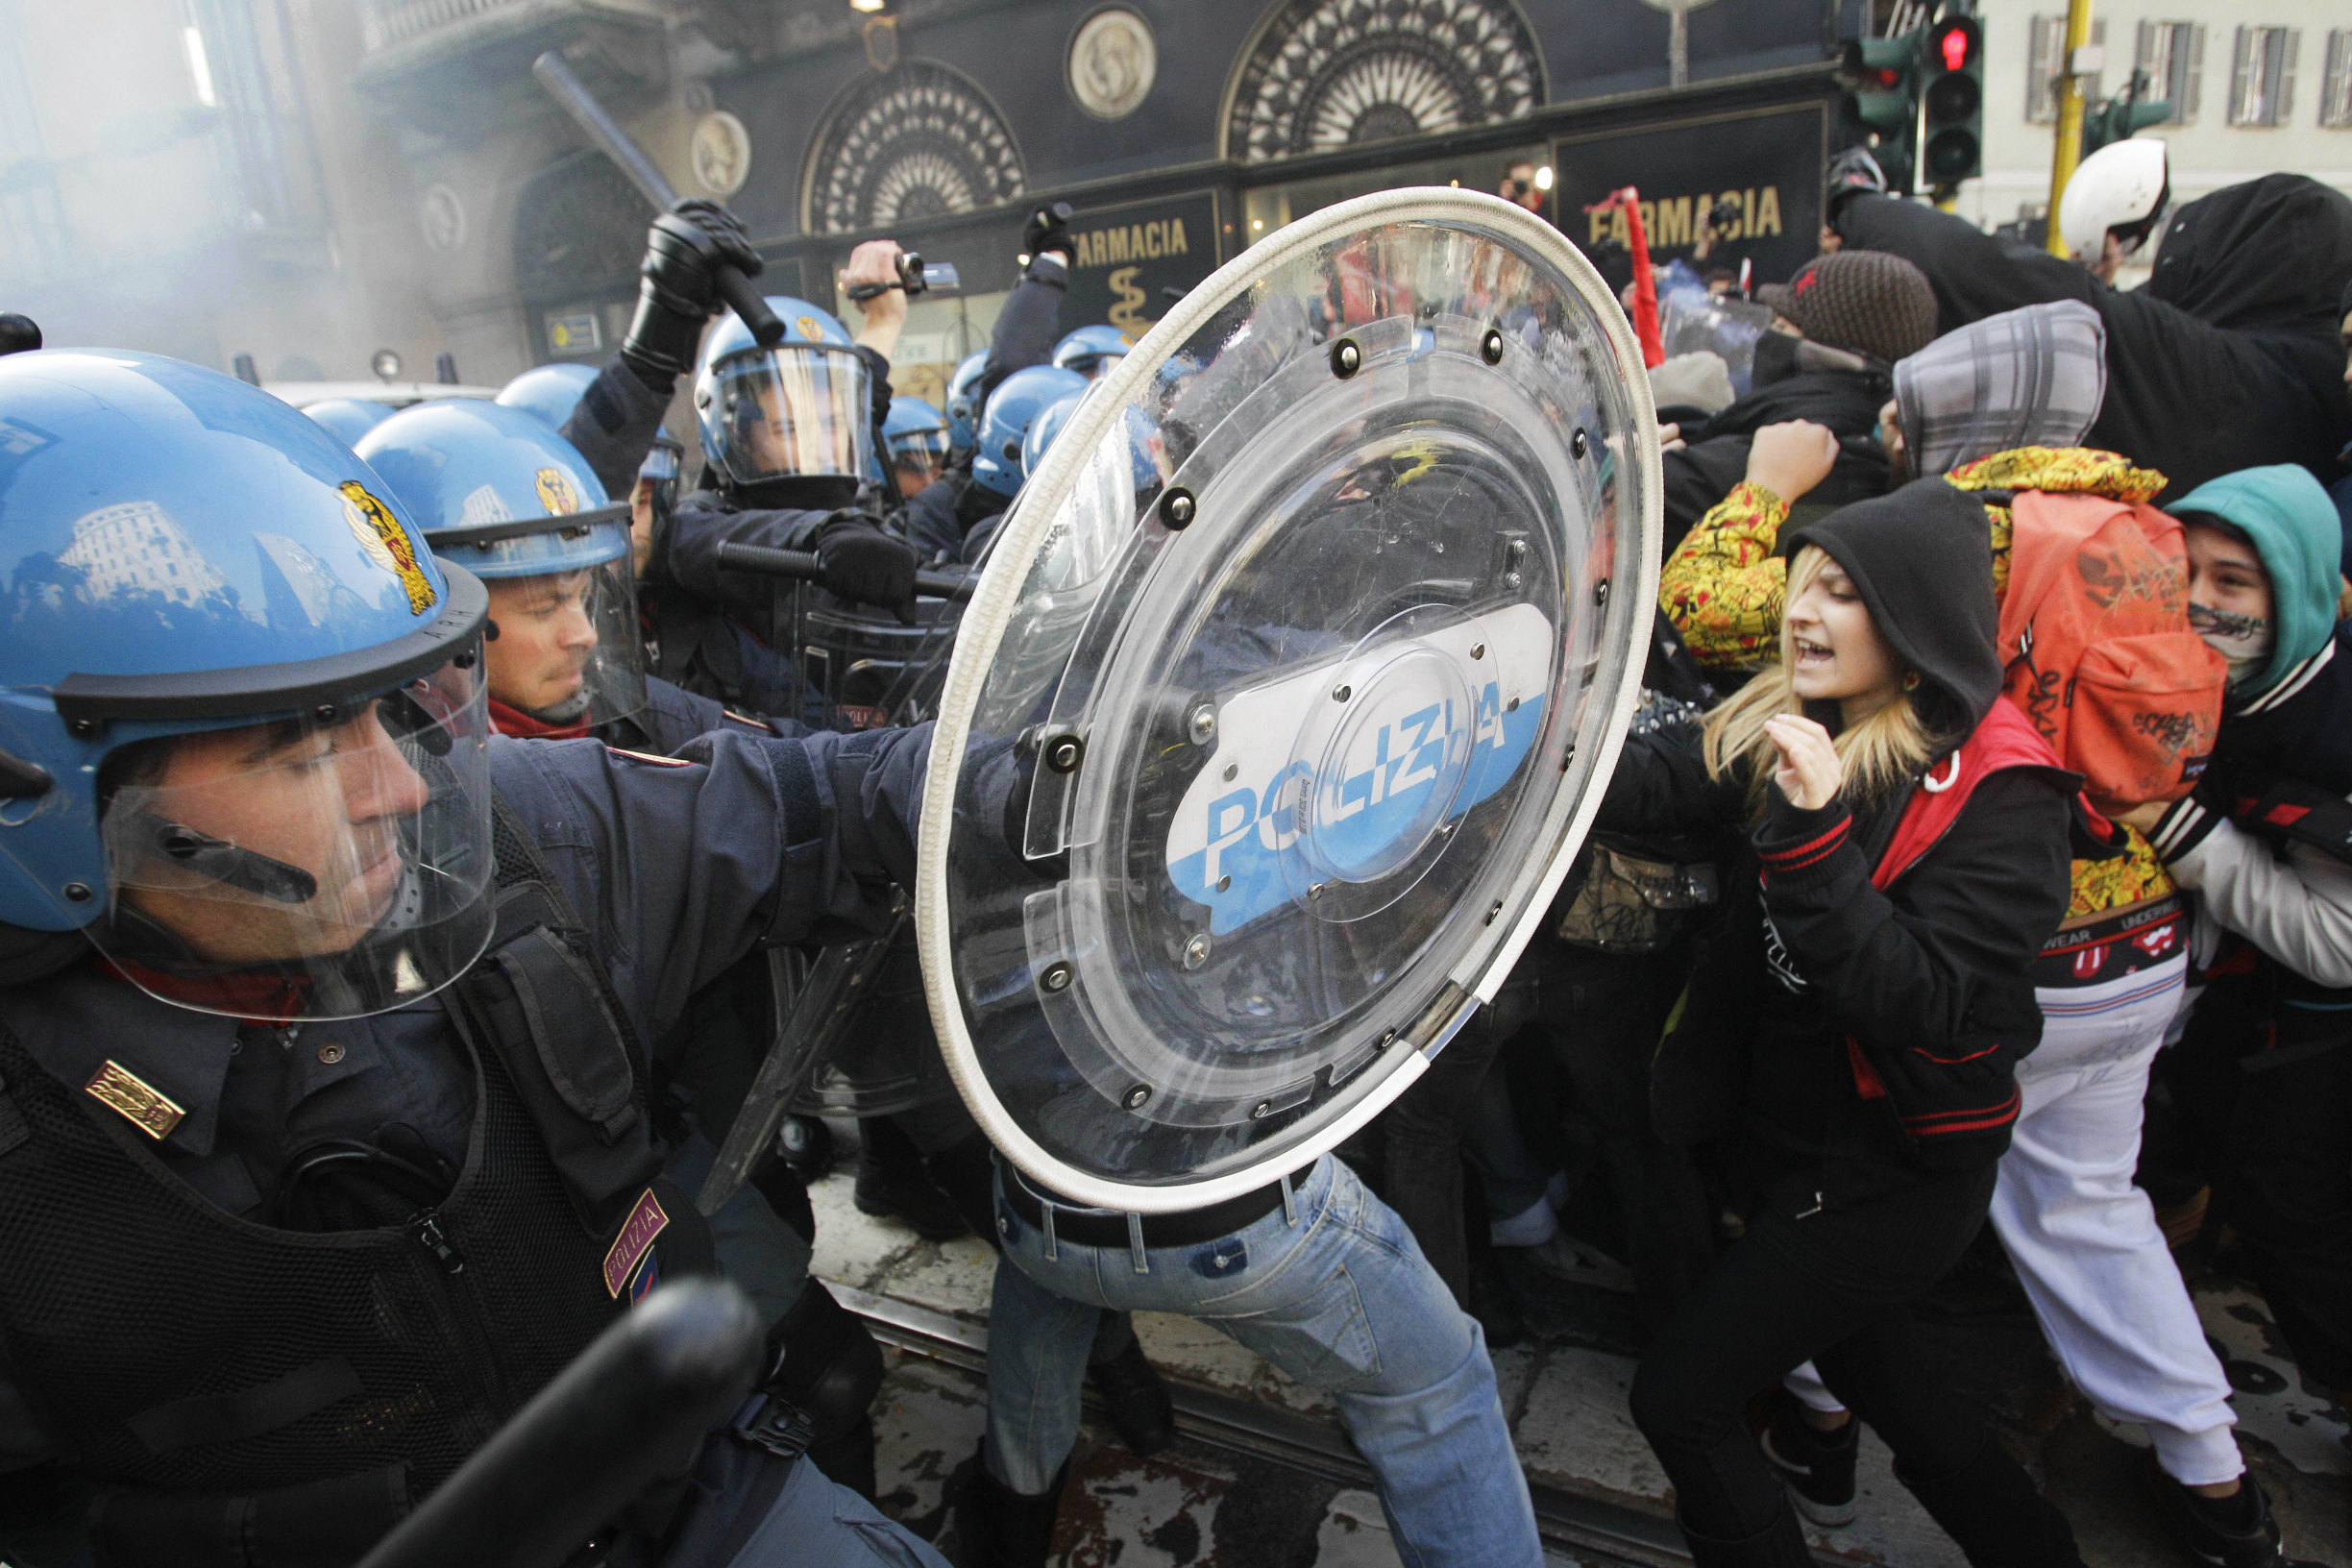 Students clash with police during a demonstration in Milan against budget cuts and a lack of jobs. Photo: AP